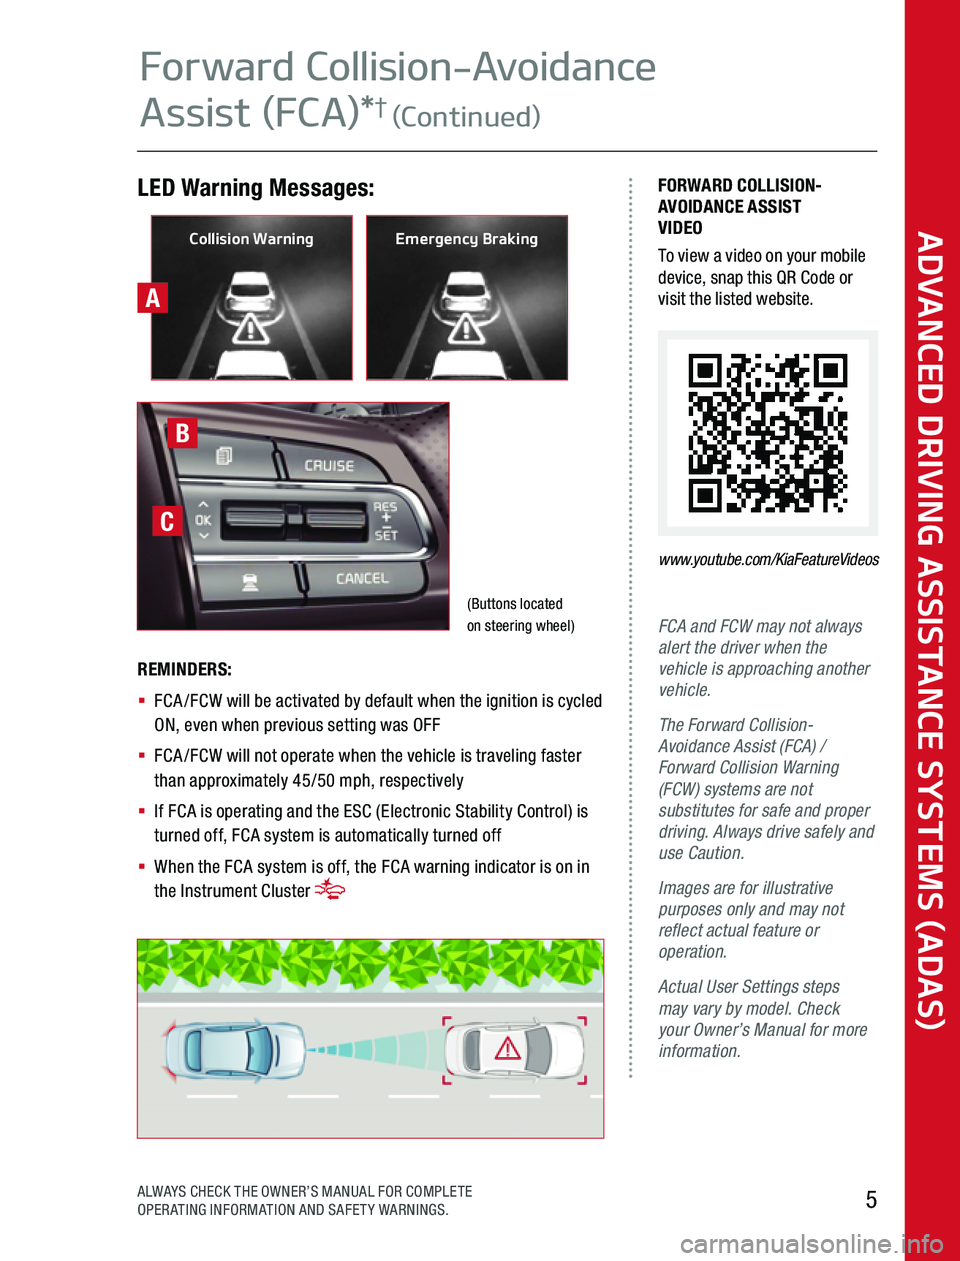 KIA SORENTO 2020  Advanced Driving Assistance System A
LED Warning Messages:FORWARD COLLISION-AVOIDANCE ASSIST VIDEOTo view a video on your mobile device, snap this QR Code or visit the listed website 
www.youtube.com/KiaFeatureVideos
FCA and FCW may no